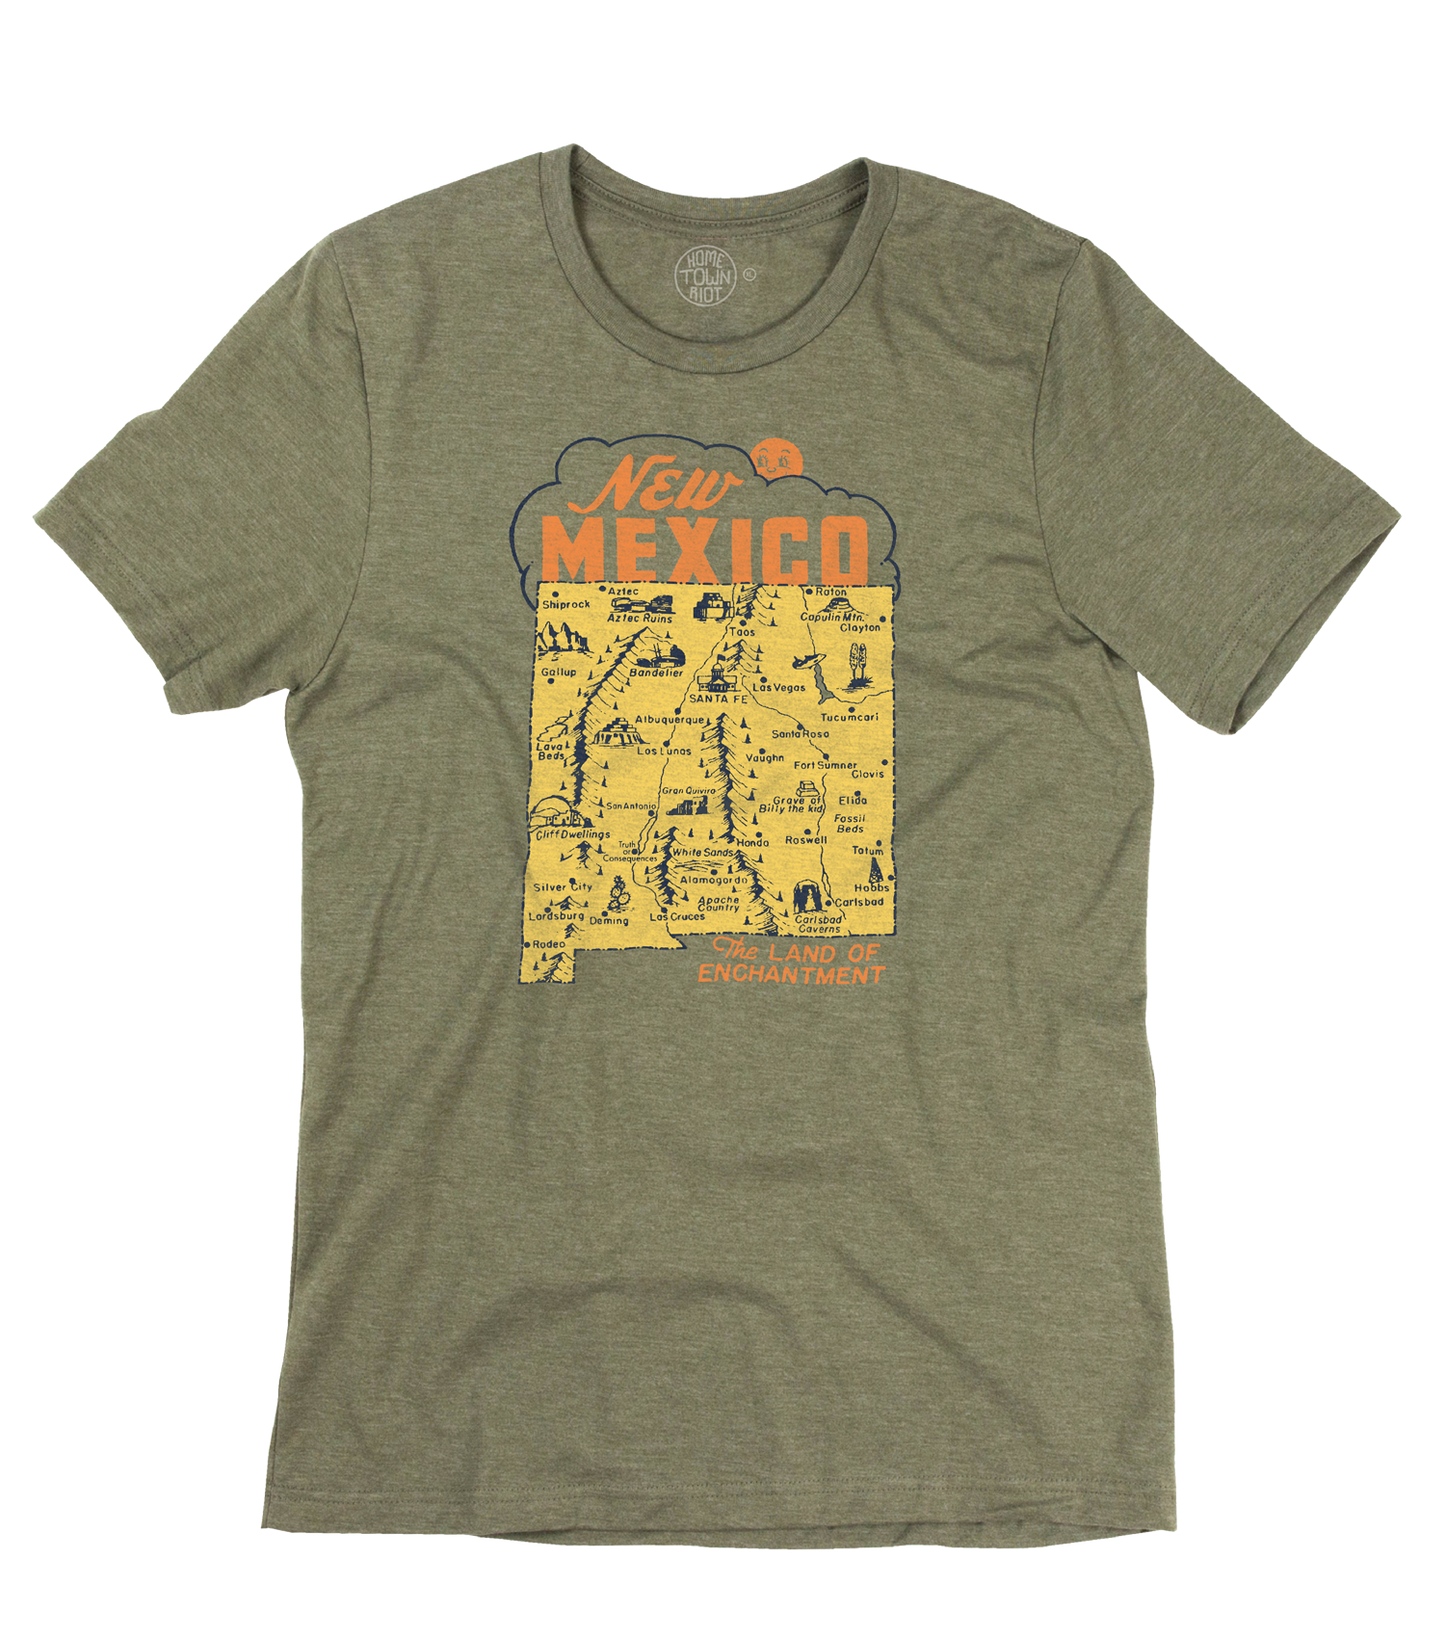 Land of Enchantment New Mexico Shirt - HomeTownRiot